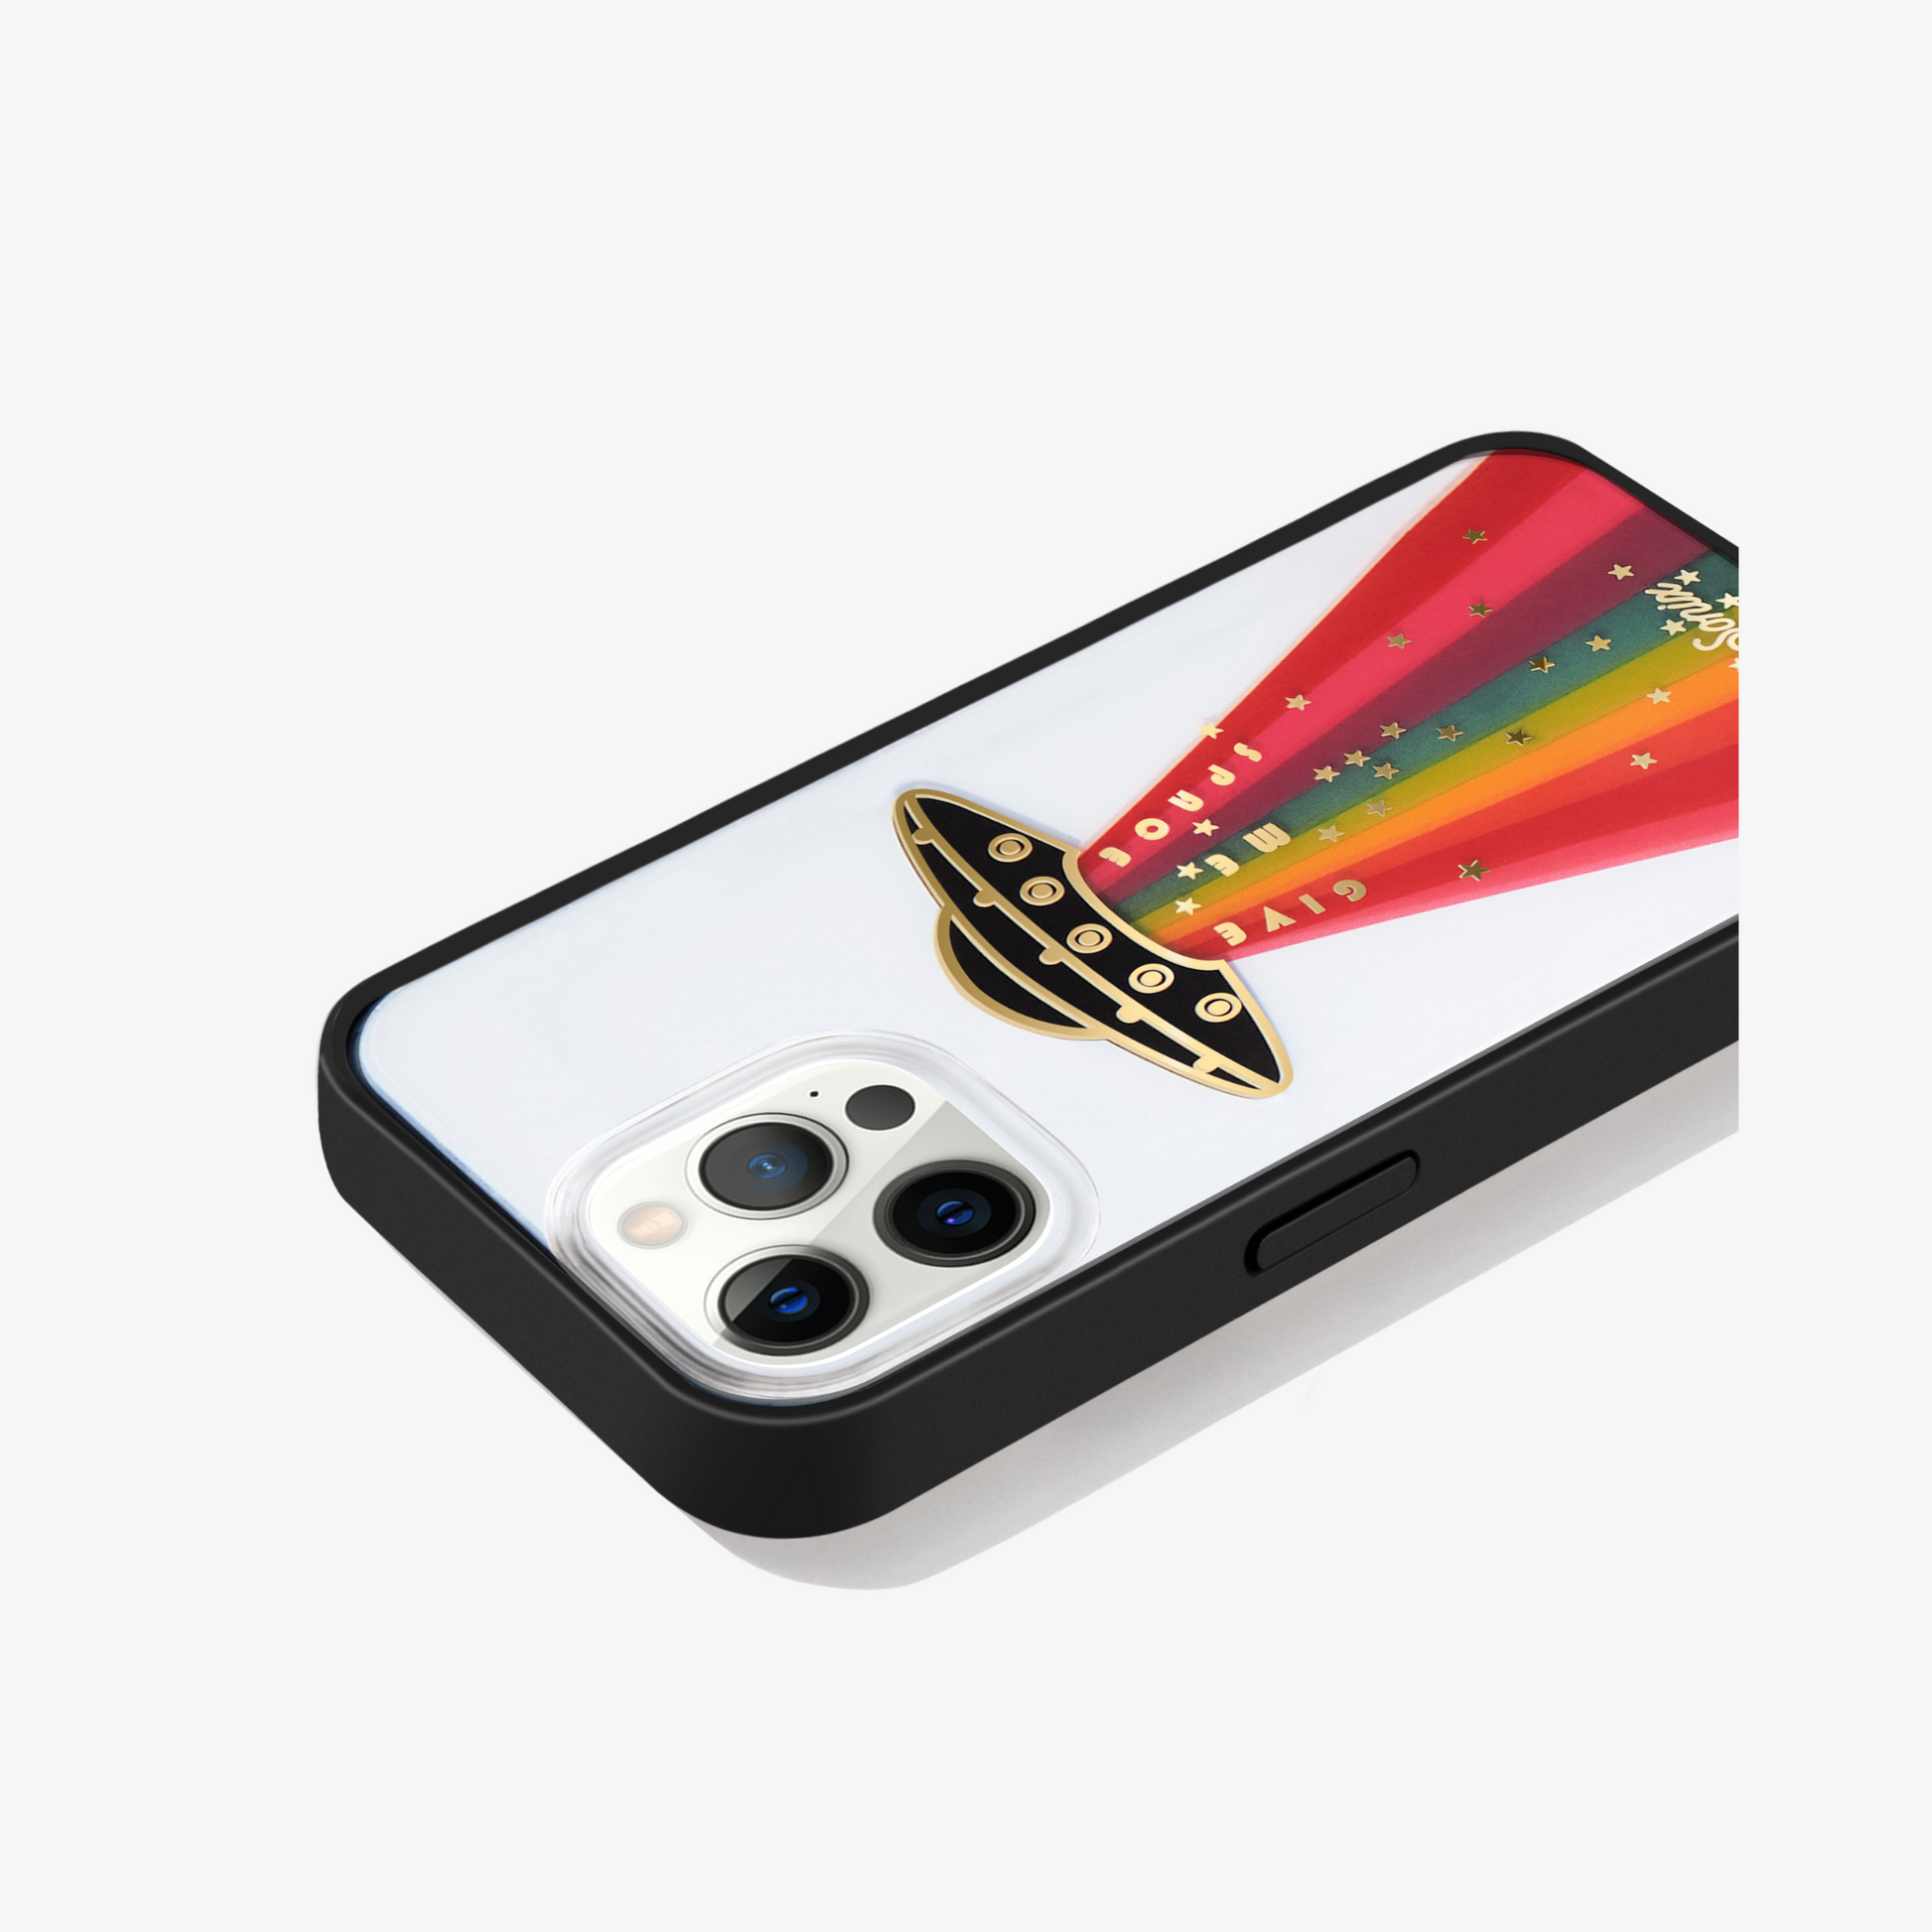 a rainbow ufo design and the words "give me space" with gold foiling and a black bumper shown on an iphone 13 pro max side view